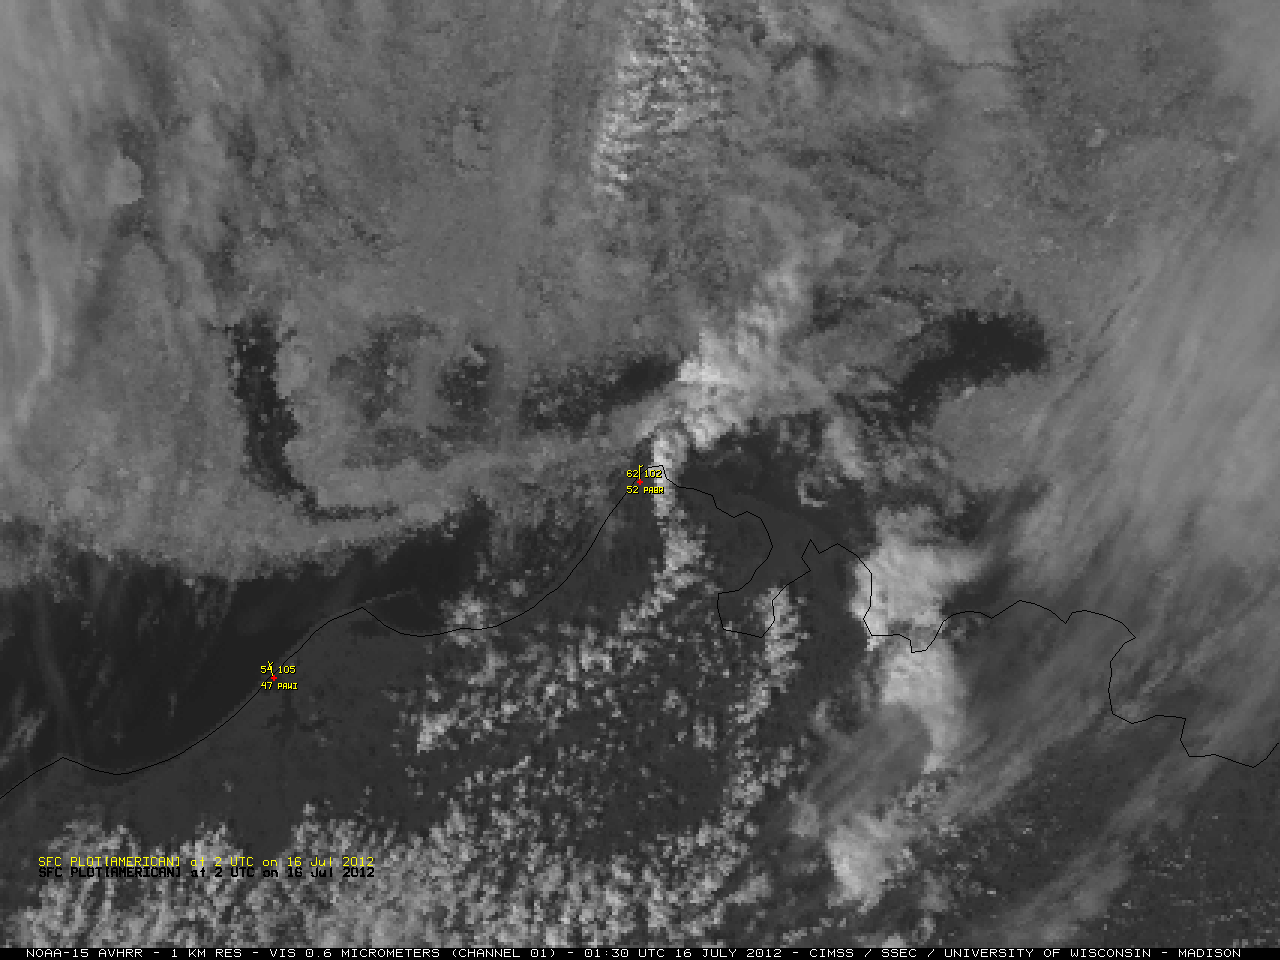 NOAA-15 AVHRR 0.6 µm visible channel and 10.8 µm IR channel images [click to enlarge]